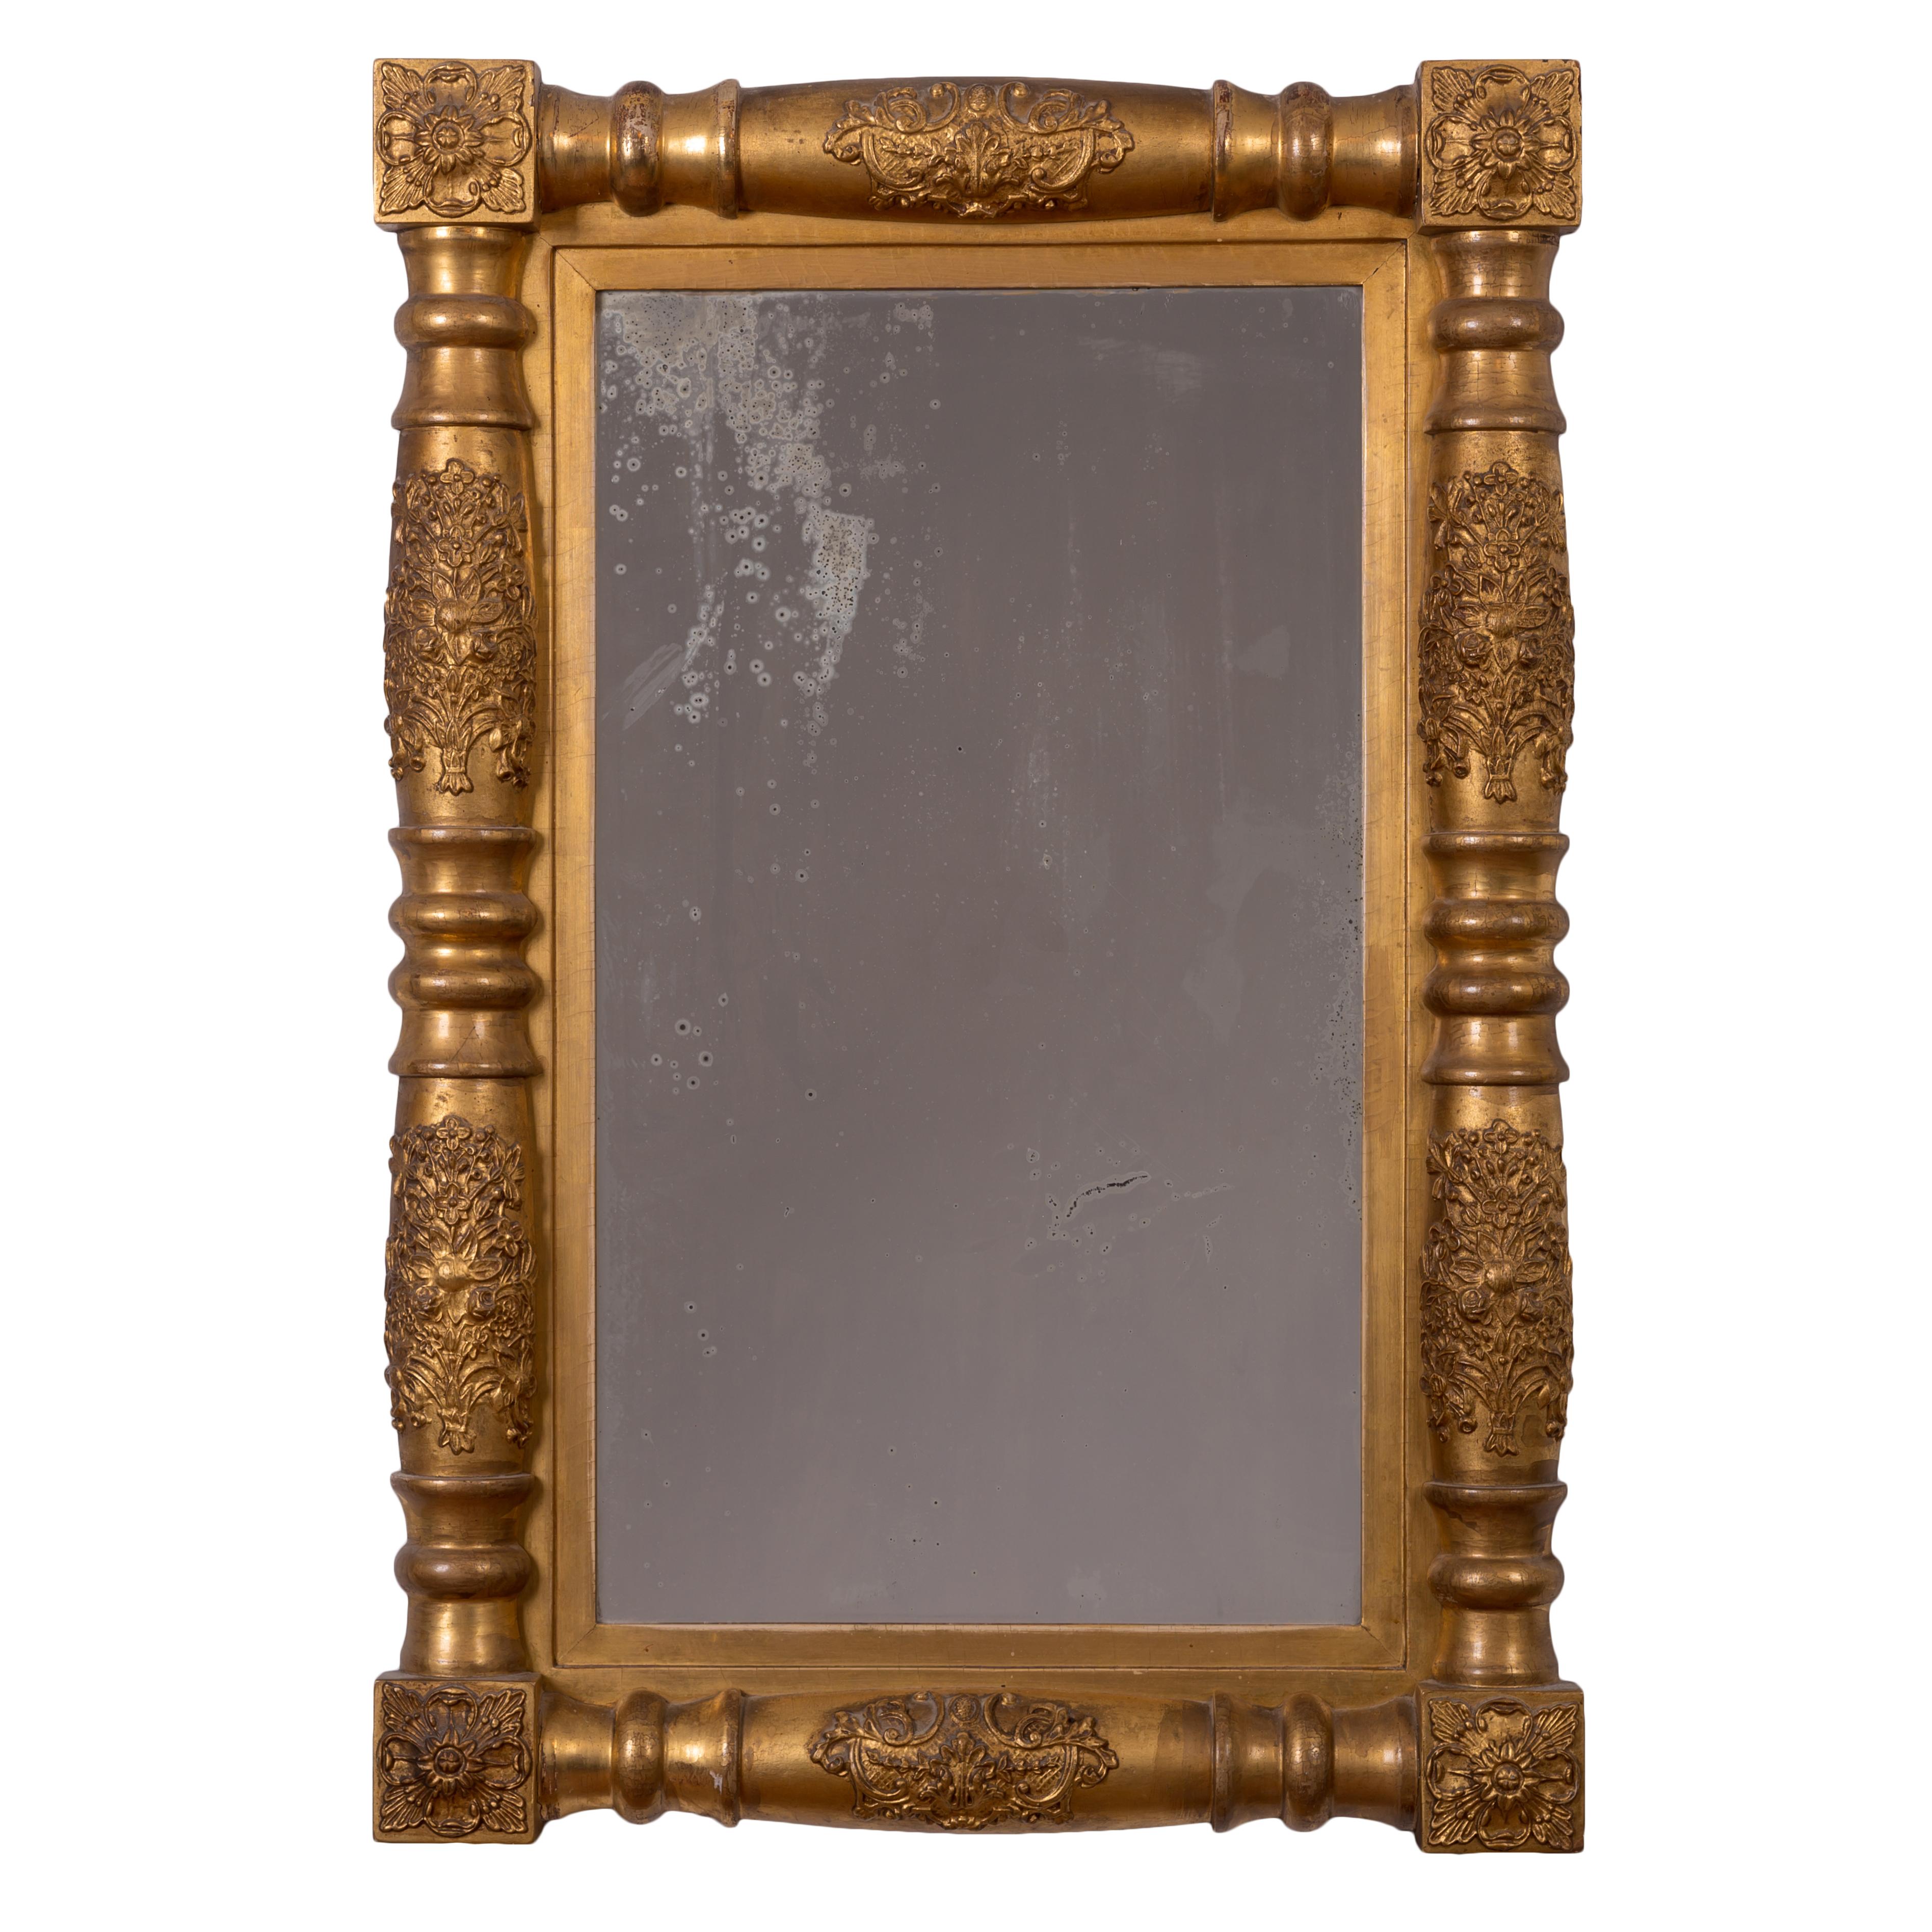 A Sheraton giltwood mirror, circa 1830.
Antique plate; original gilding with some early retouching.

23 inches wide by 34 inches tall by 3 inches deep